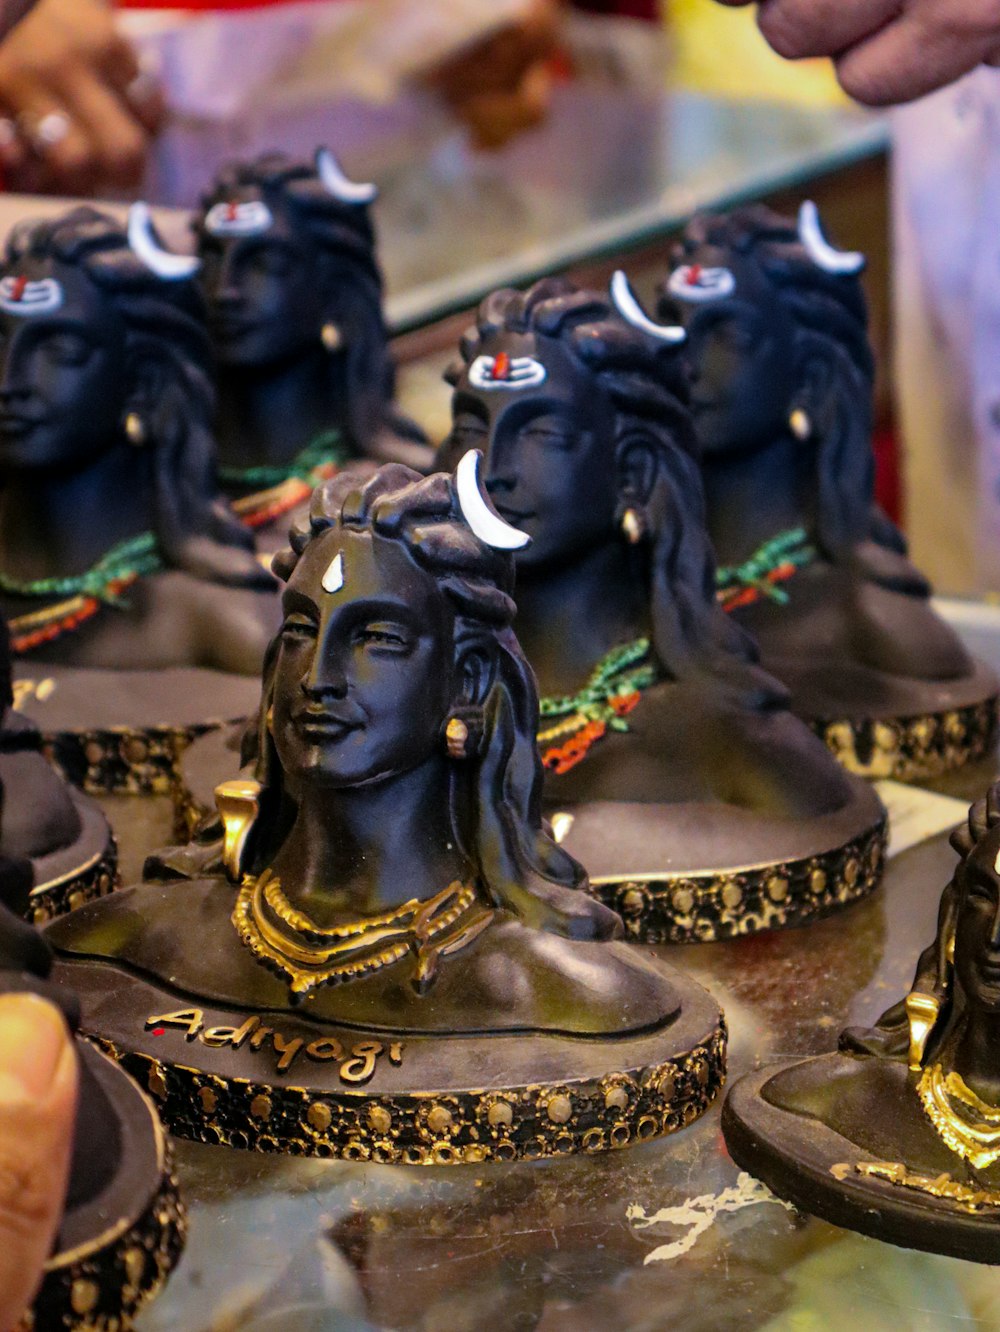 a close up of a group of statues on a table